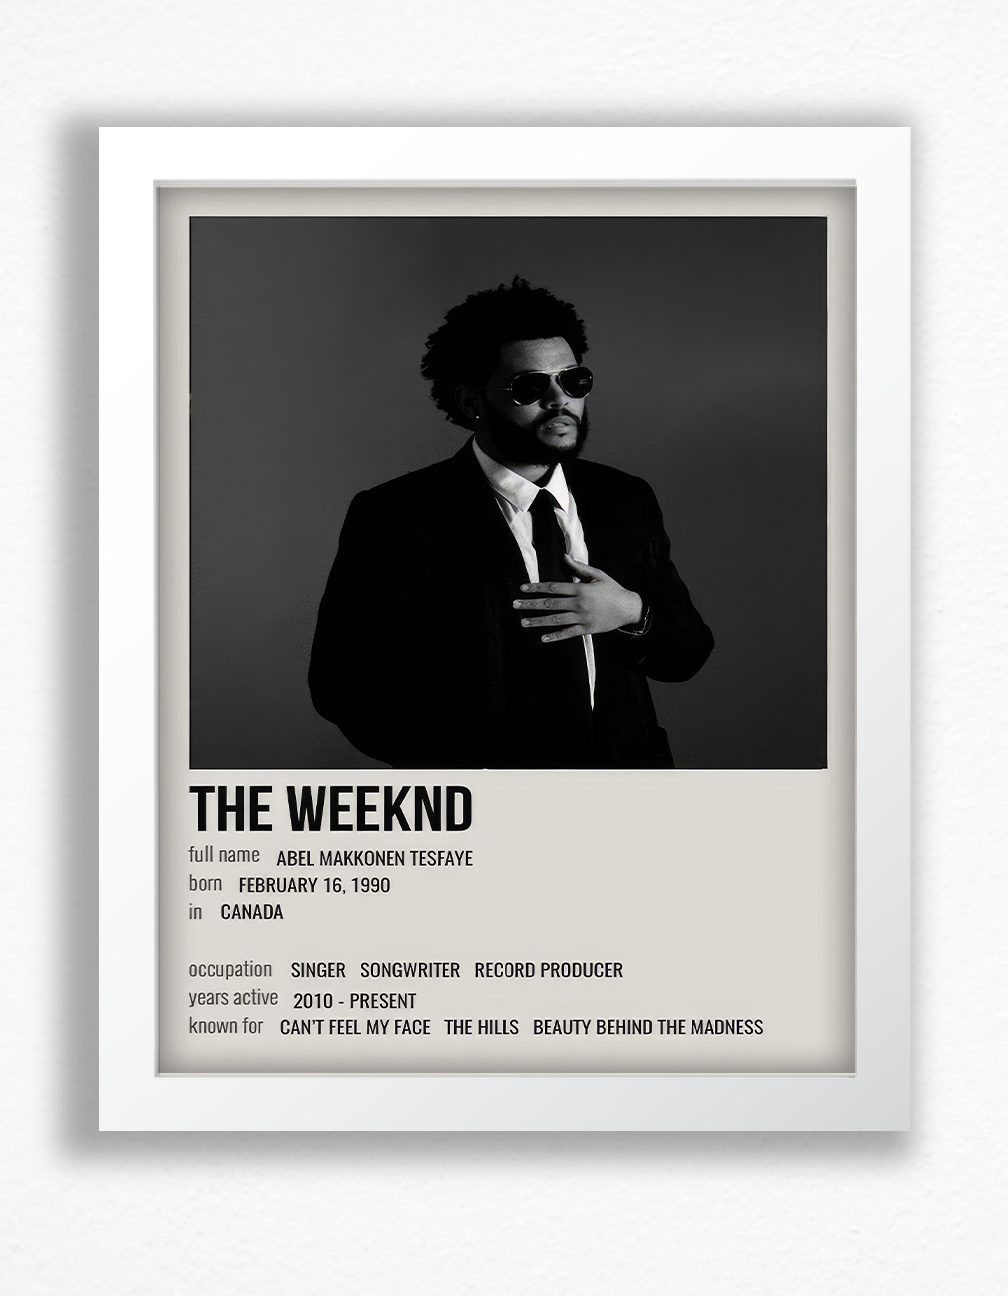 Classic - The Weeknd